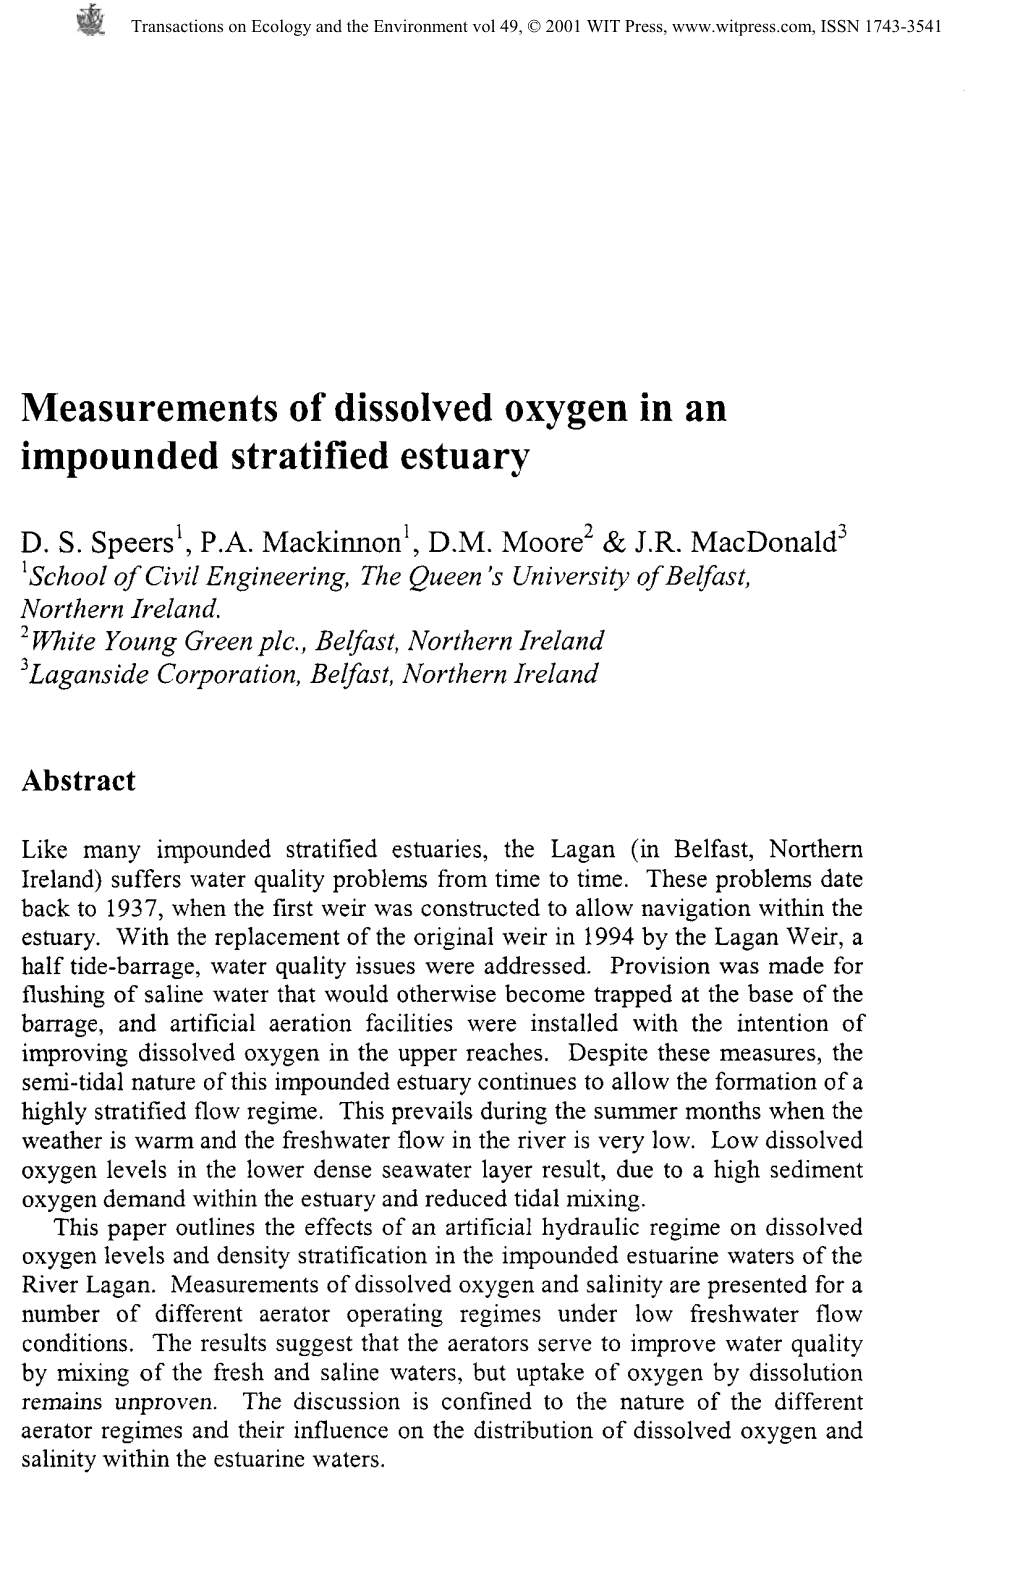 Measurements of Dissolved Oxygen in an Impounded Stratified Estuary